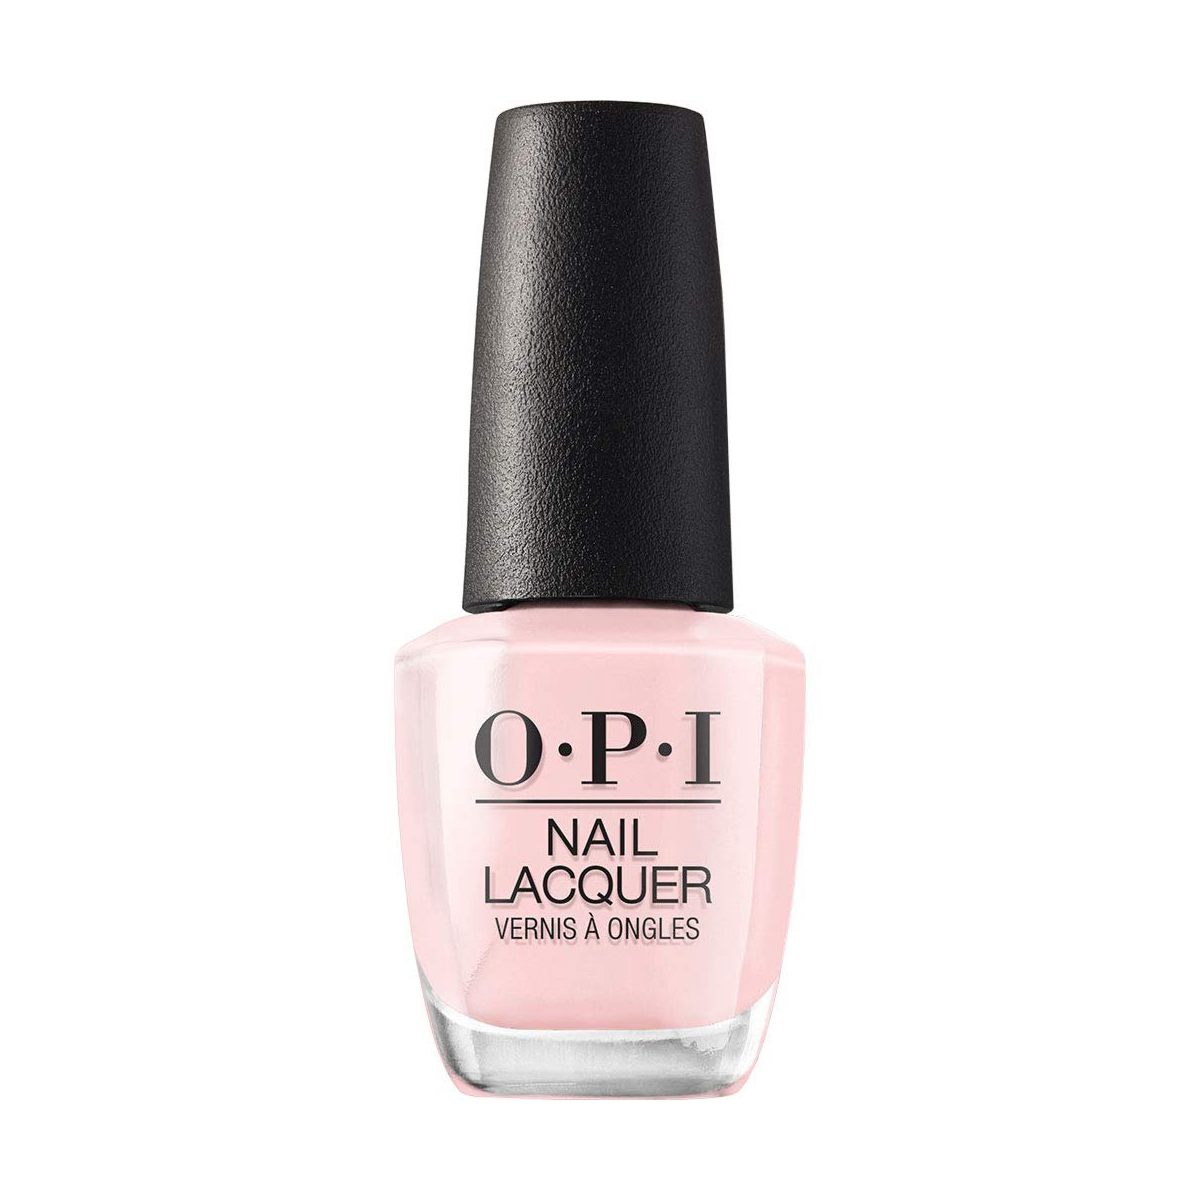 OPI Nail Lacquer in Put It In Neutral